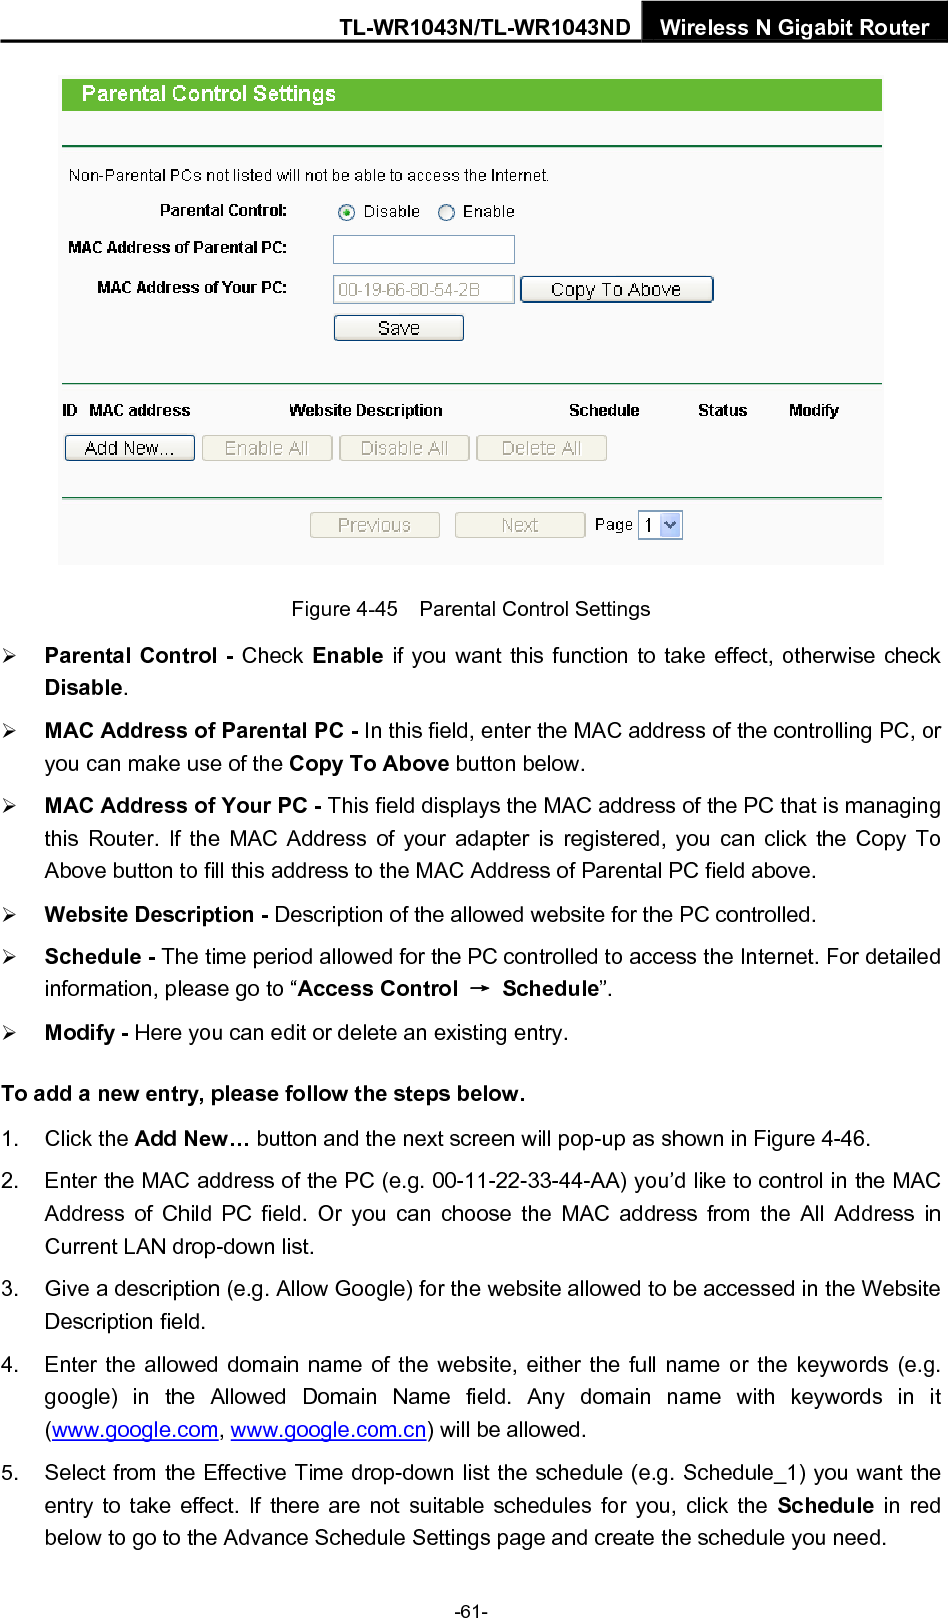 TL-WR1043N/TL-WR1043ND Wireless N Gigabit Router  Figure 4-45    Parental Control Settings ¾ Parental Control - Check Enable if you want this function to take effect, otherwise check Disable.  ¾ MAC Address of Parental PC - In this field, enter the MAC address of the controlling PC, or you can make use of the Copy To Above button below.   ¾ MAC Address of Your PC - This field displays the MAC address of the PC that is managing this Router. If the MAC Address of your adapter is registered, you can click the Copy To Above button to fill this address to the MAC Address of Parental PC field above.   ¾ Website Description - Description of the allowed website for the PC controlled.   ¾ Schedule - The time period allowed for the PC controlled to access the Internet. For detailed information, please go to “Access Control  → Schedule”.  ¾ Modify - Here you can edit or delete an existing entry.   To add a new entry, please follow the steps below. 1. Click the Add New… button and the next screen will pop-up as shown in Figure 4-46. 2.  Enter the MAC address of the PC (e.g. 00-11-22-33-44-AA) you’d like to control in the MAC Address of Child PC field. Or you can choose the MAC address from the All Address in Current LAN drop-down list. 3.  Give a description (e.g. Allow Google) for the website allowed to be accessed in the Website Description field. 4.  Enter the allowed domain name of the website, either the full name or the keywords (e.g. google) in the Allowed Domain Name field. Any domain name with keywords in it (www.google.com, www.google.com.cn) will be allowed. 5.  Select from the Effective Time drop-down list the schedule (e.g. Schedule_1) you want the entry to take effect. If there are not suitable schedules for you, click the Schedule  in red below to go to the Advance Schedule Settings page and create the schedule you need. -61- 